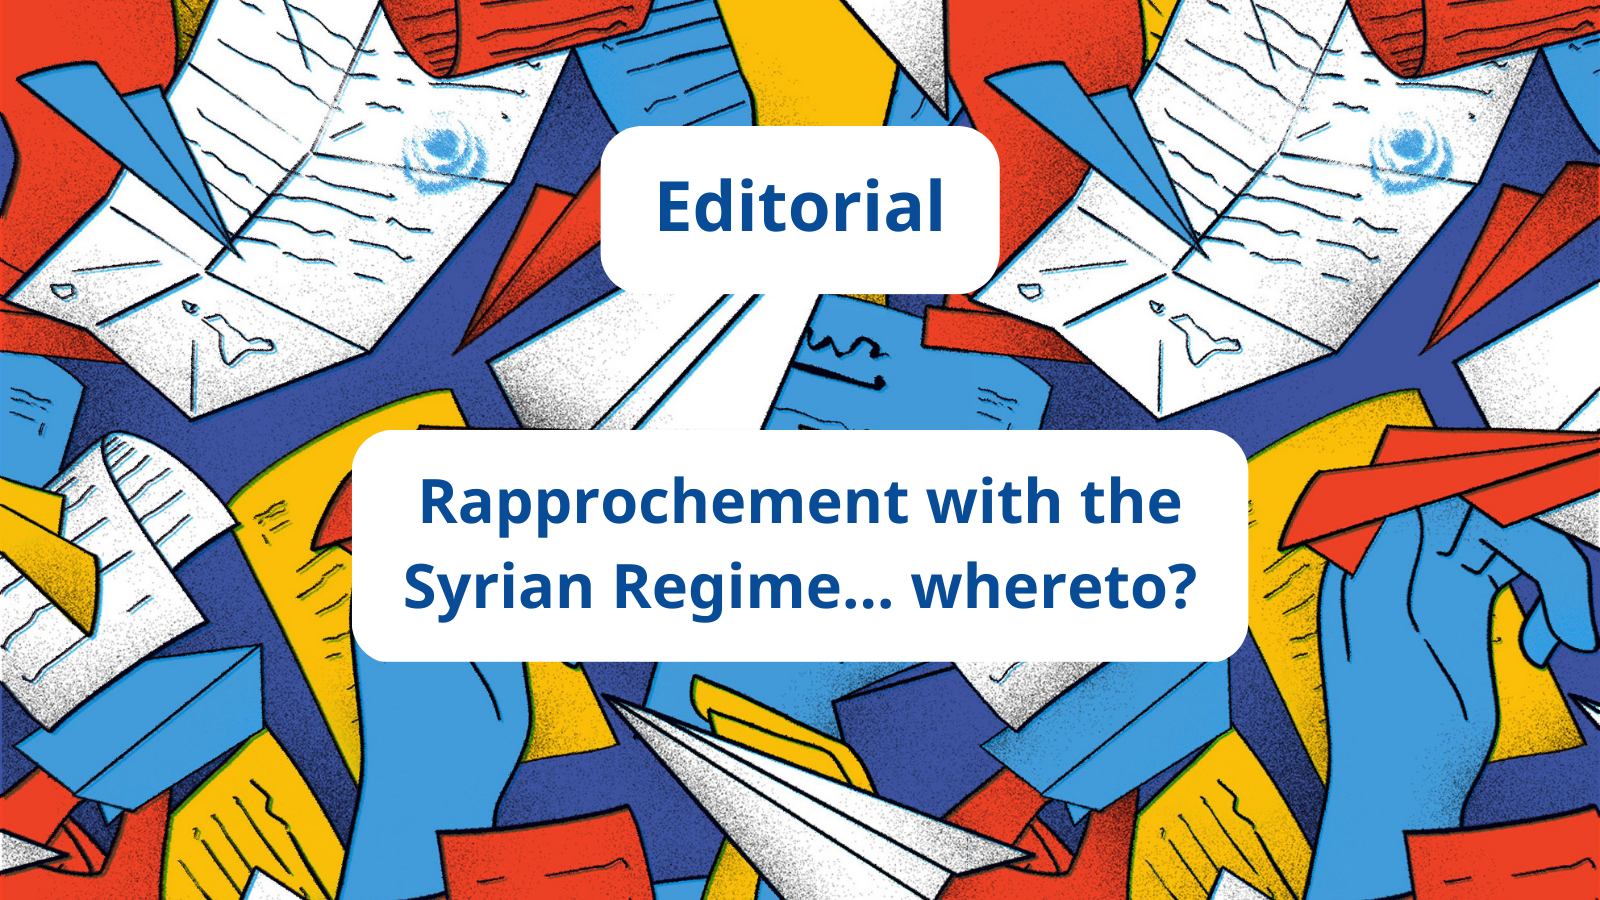 Rapprochement with the Syrian Regime… whereto?